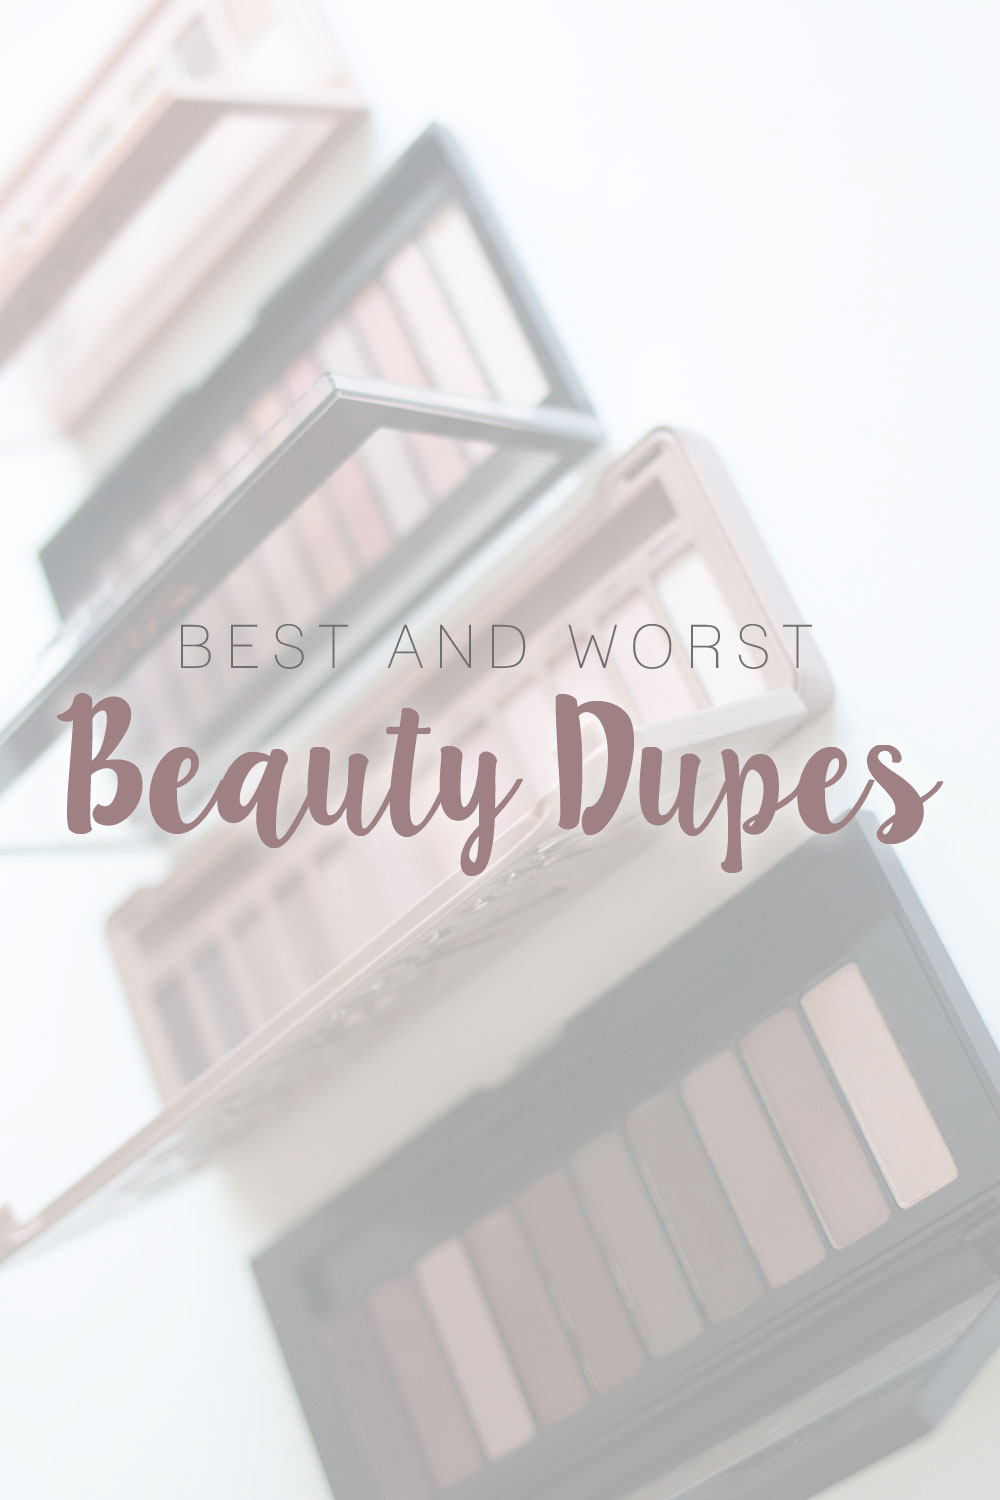 https://www.hellorigby.com/wp-content/uploads/2016/03/best-worst-of-beauty-dupes-duds.jpg